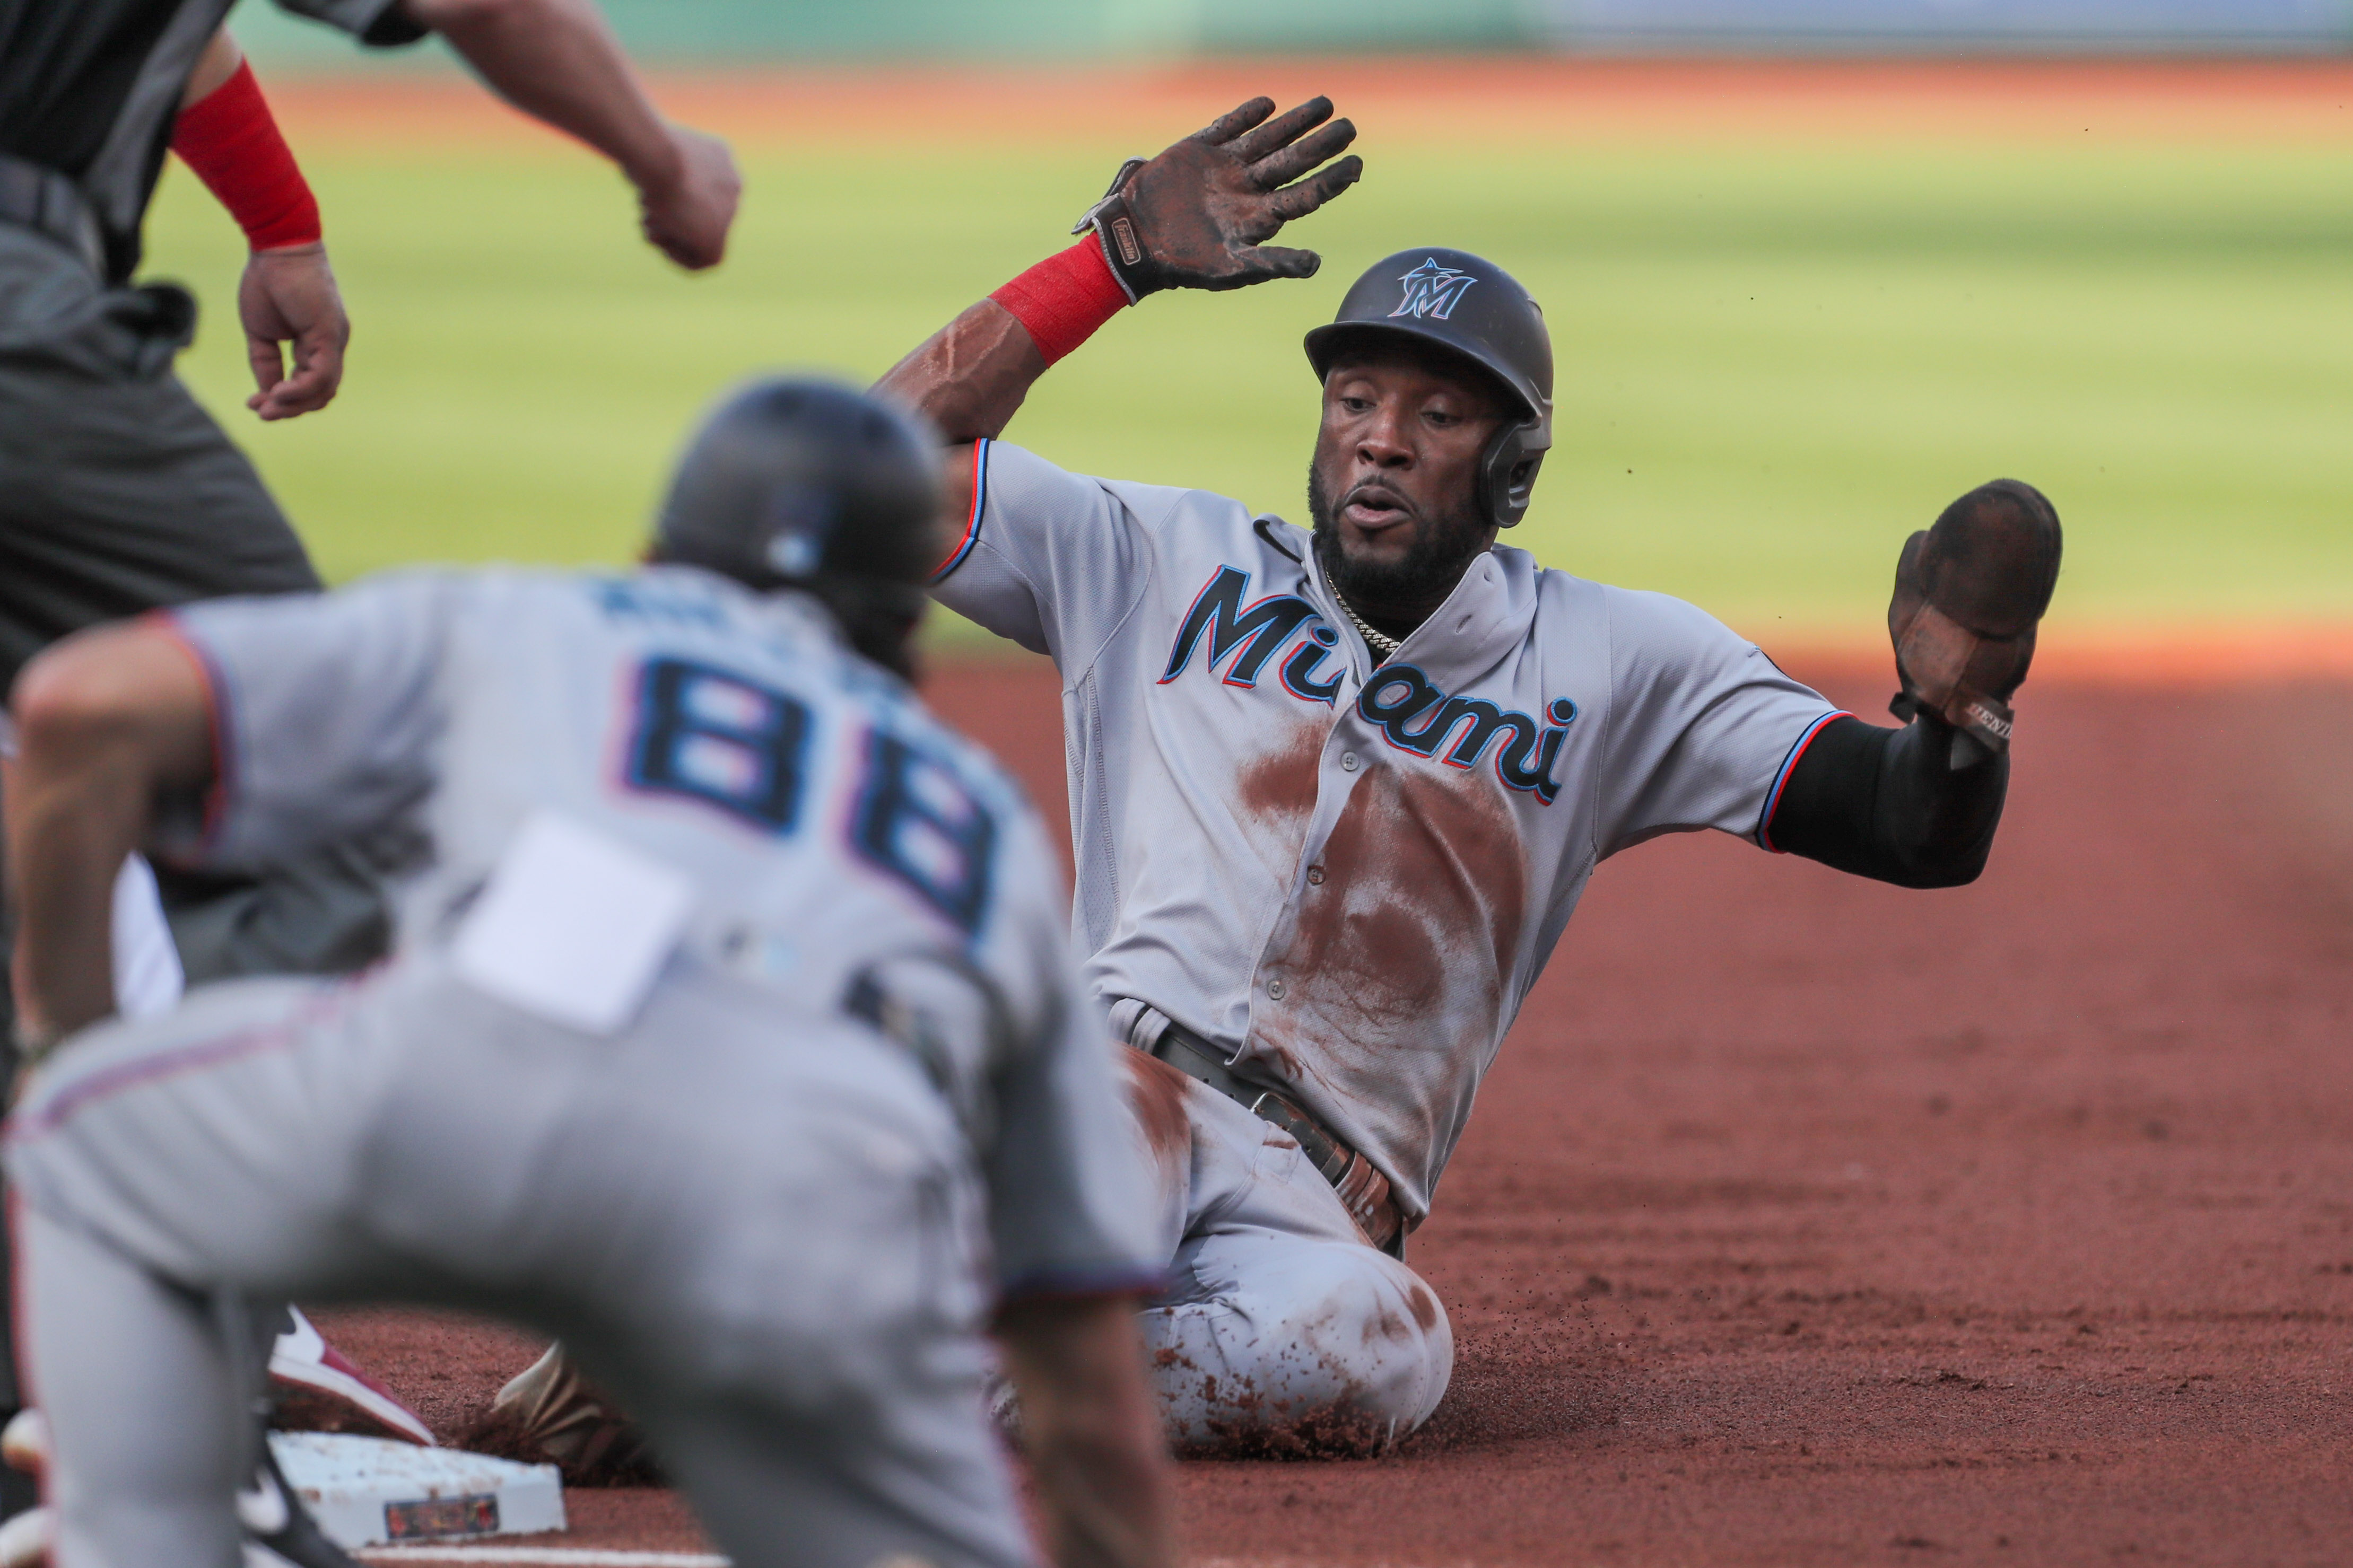 Miami Marlins center fielder Starling Marte (6) slides into third during the third inning against the Boston Red Sox at Fenway Park